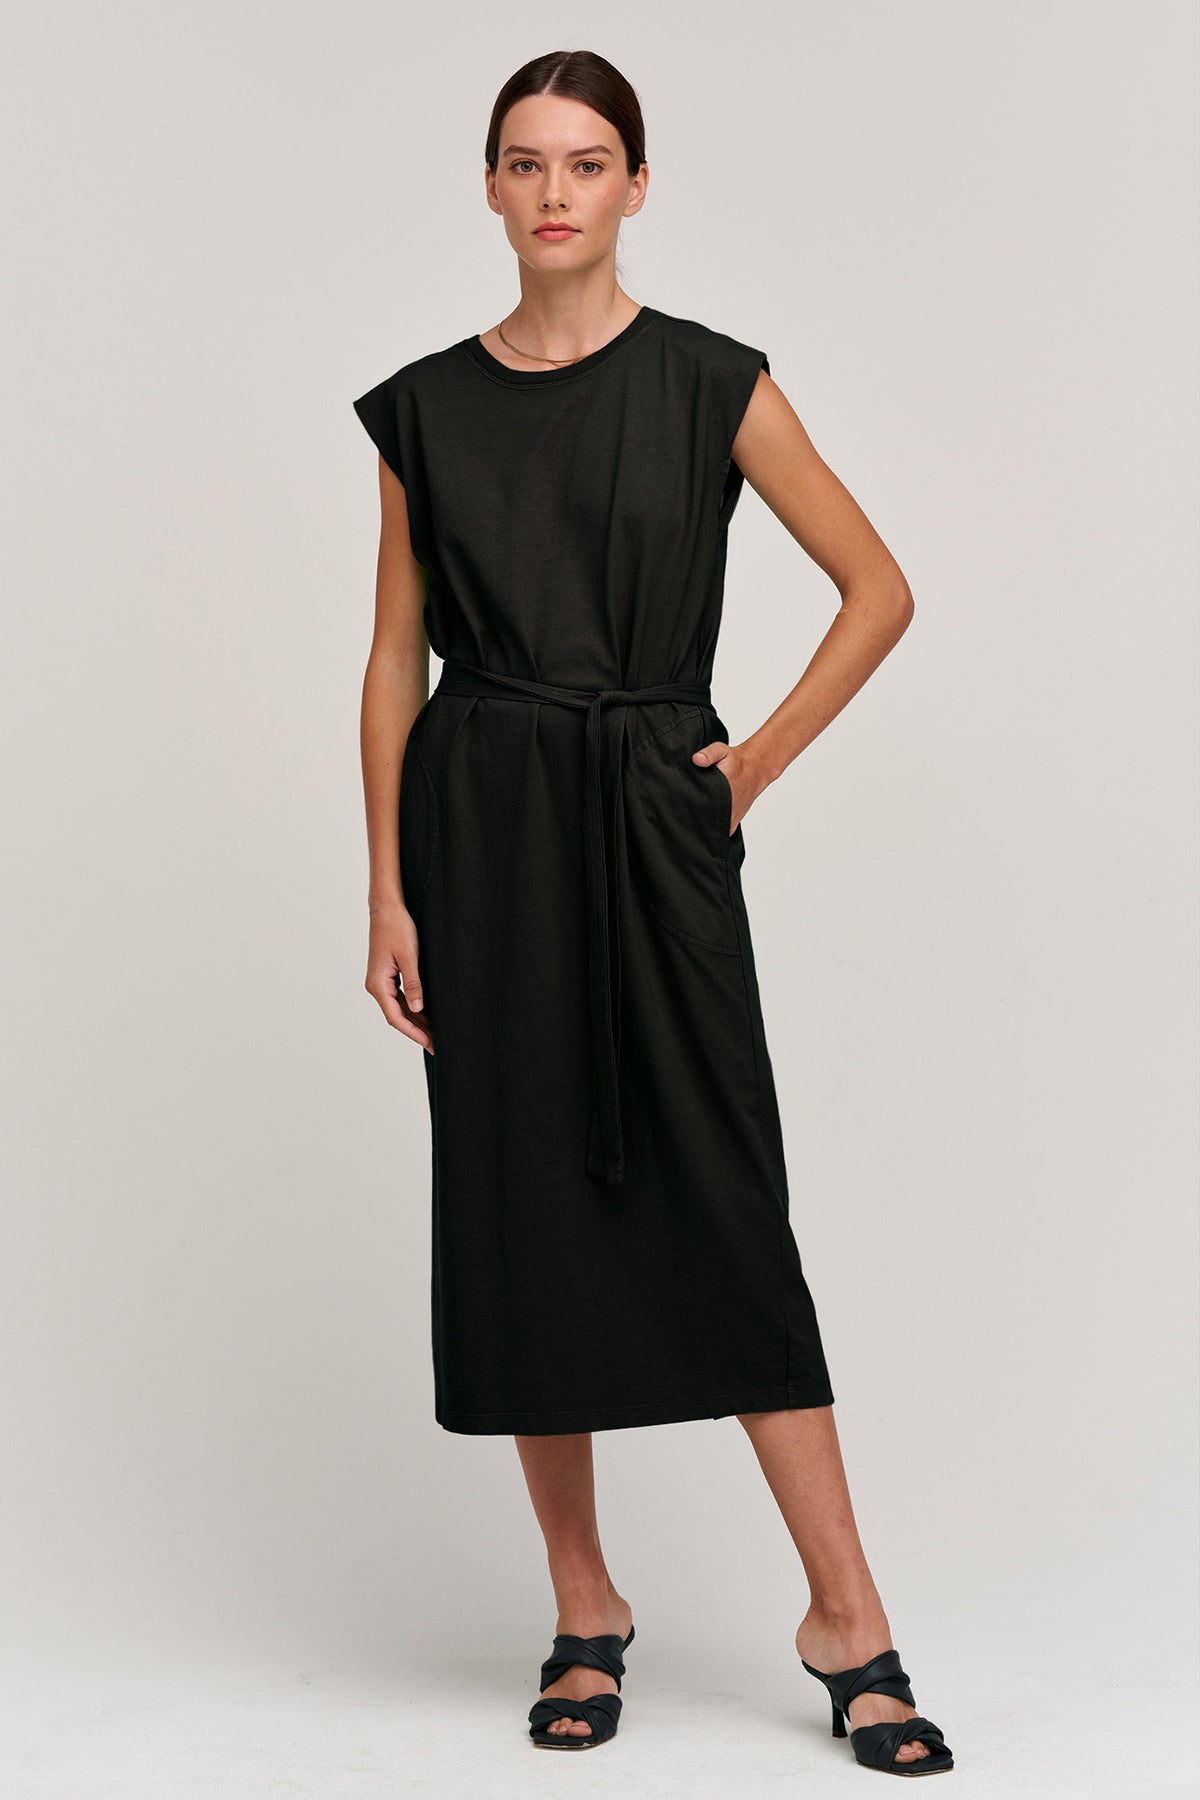 Kenny sleeveless dress in black front tied-25025664549057